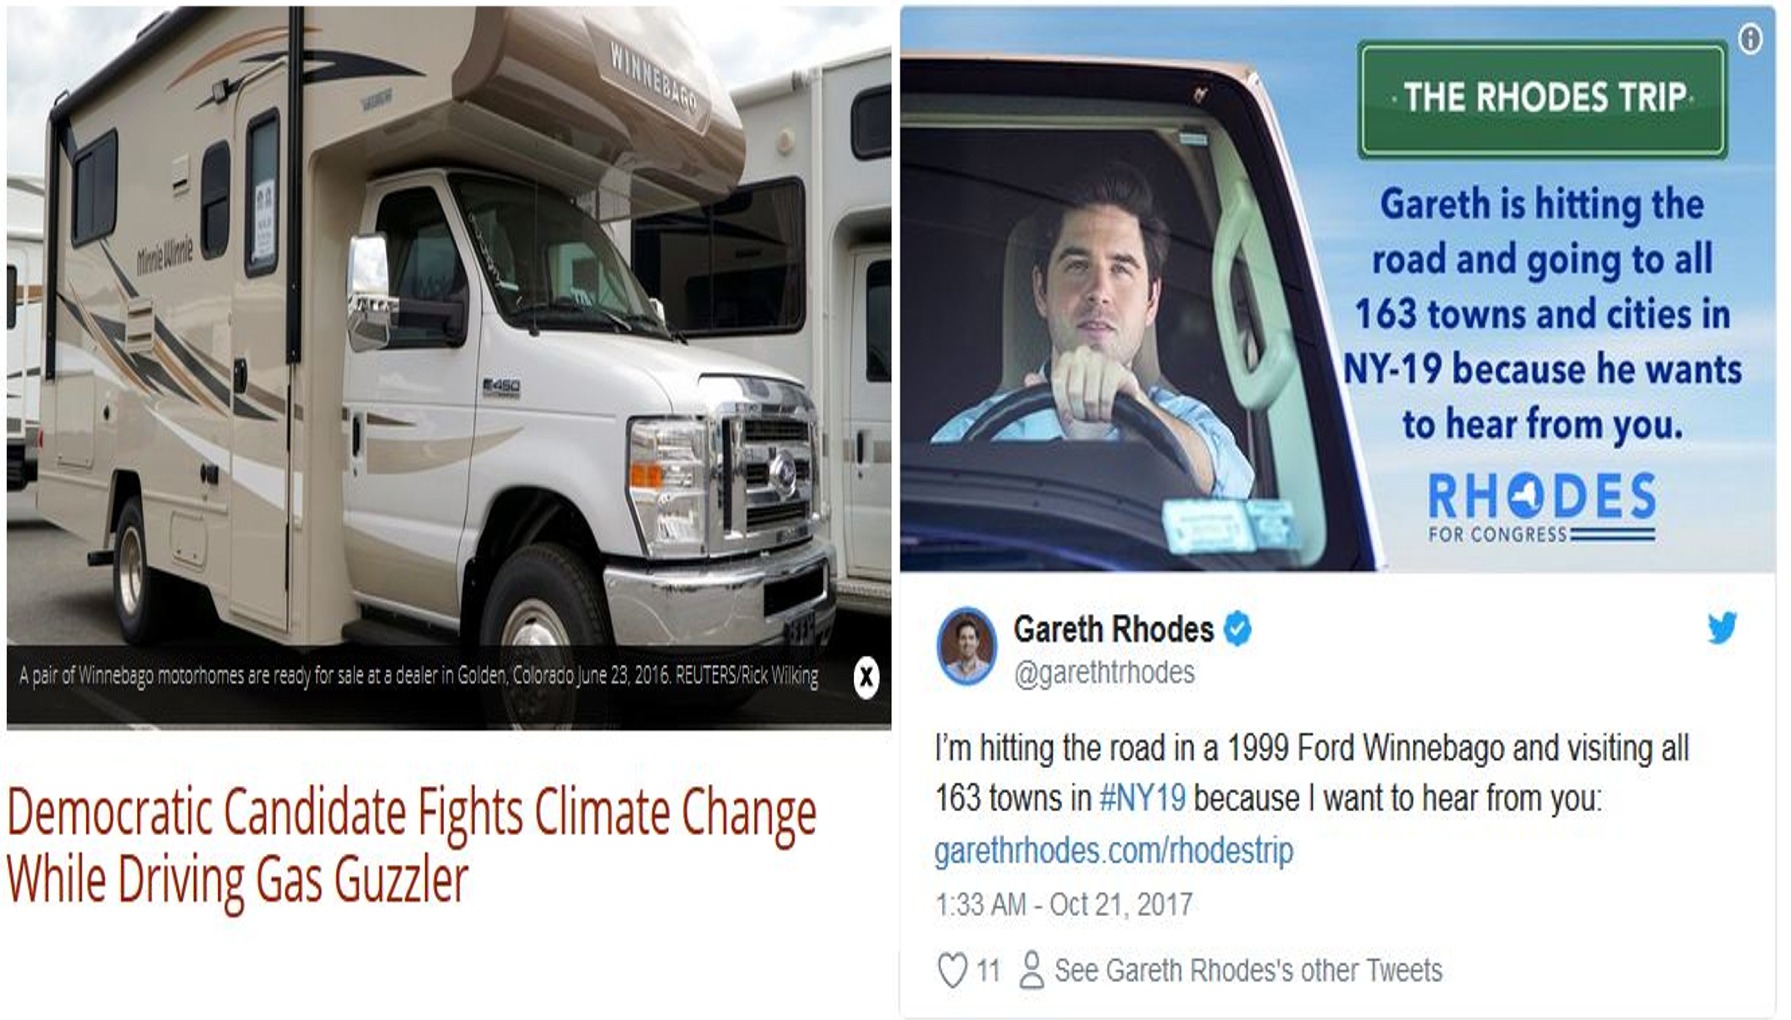 commercial vehicle - The Rhodes Trip Gareth is hitting the road and going to all 163 towns and cities in Ny19 because he wants to hear from you. Rhodes 450 For Congresse Gareth Rhodes A pair of Winnebago motorhomes are ready for sale at a dealer in Golden